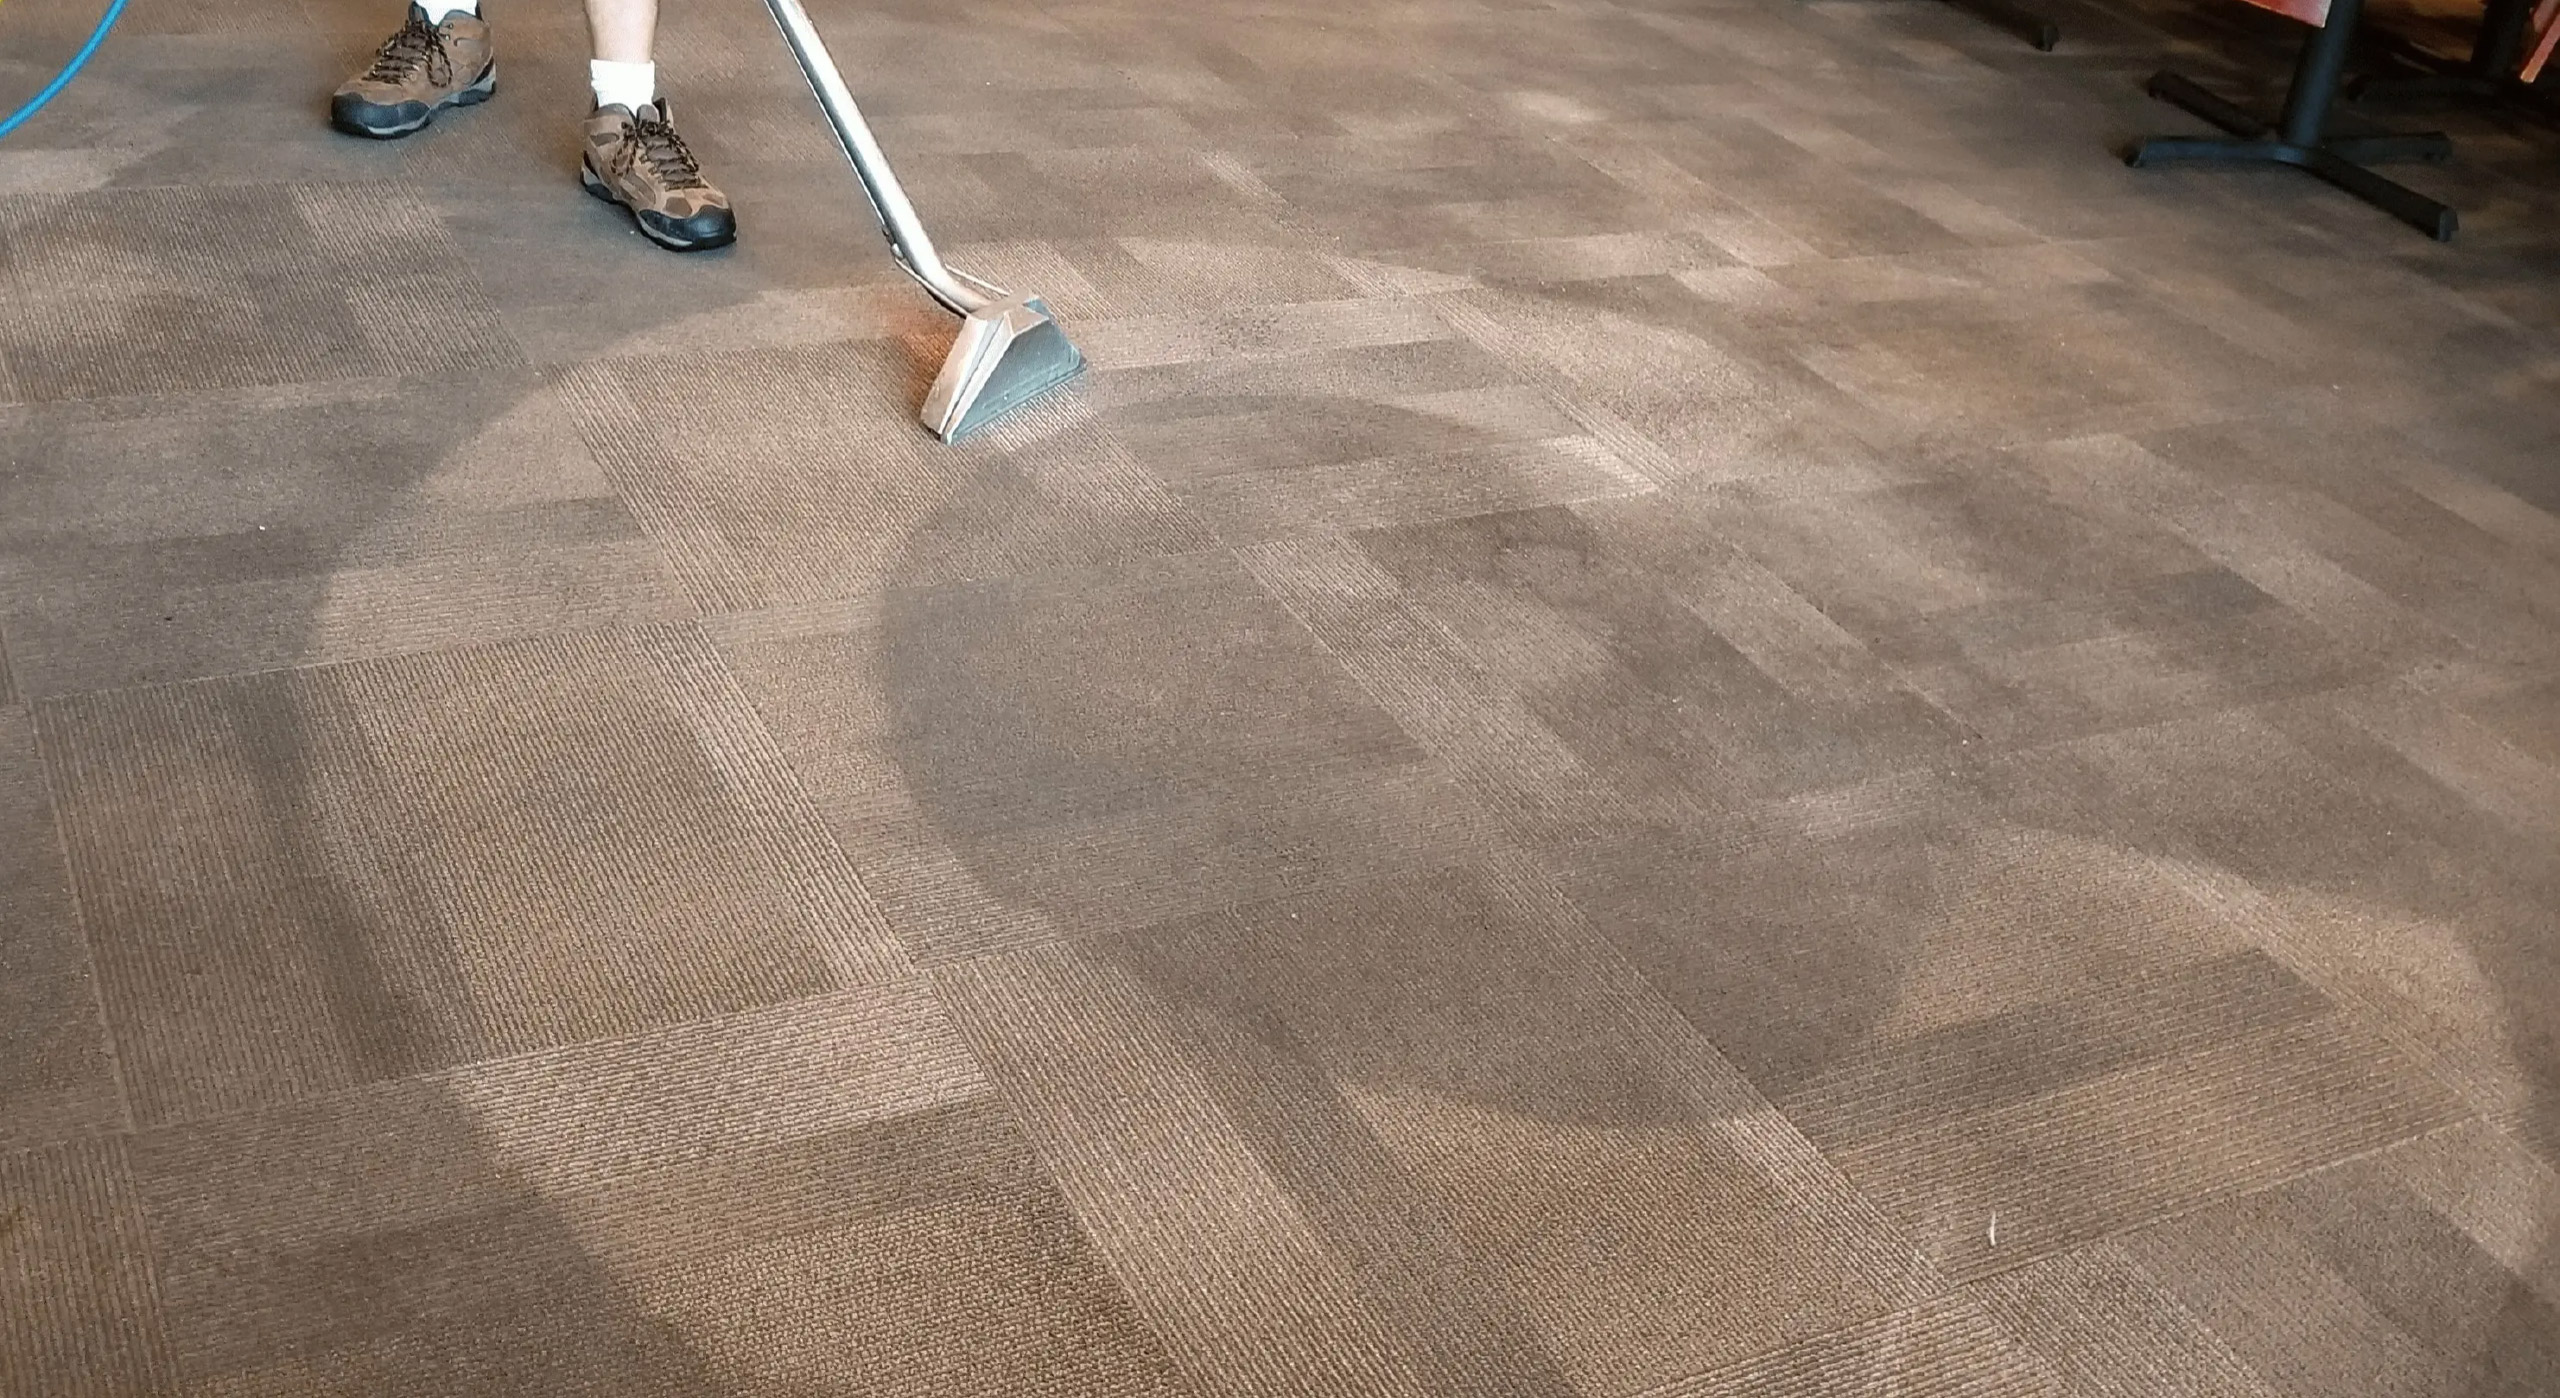 Is Professional Carpet Cleaning Worth the Money?